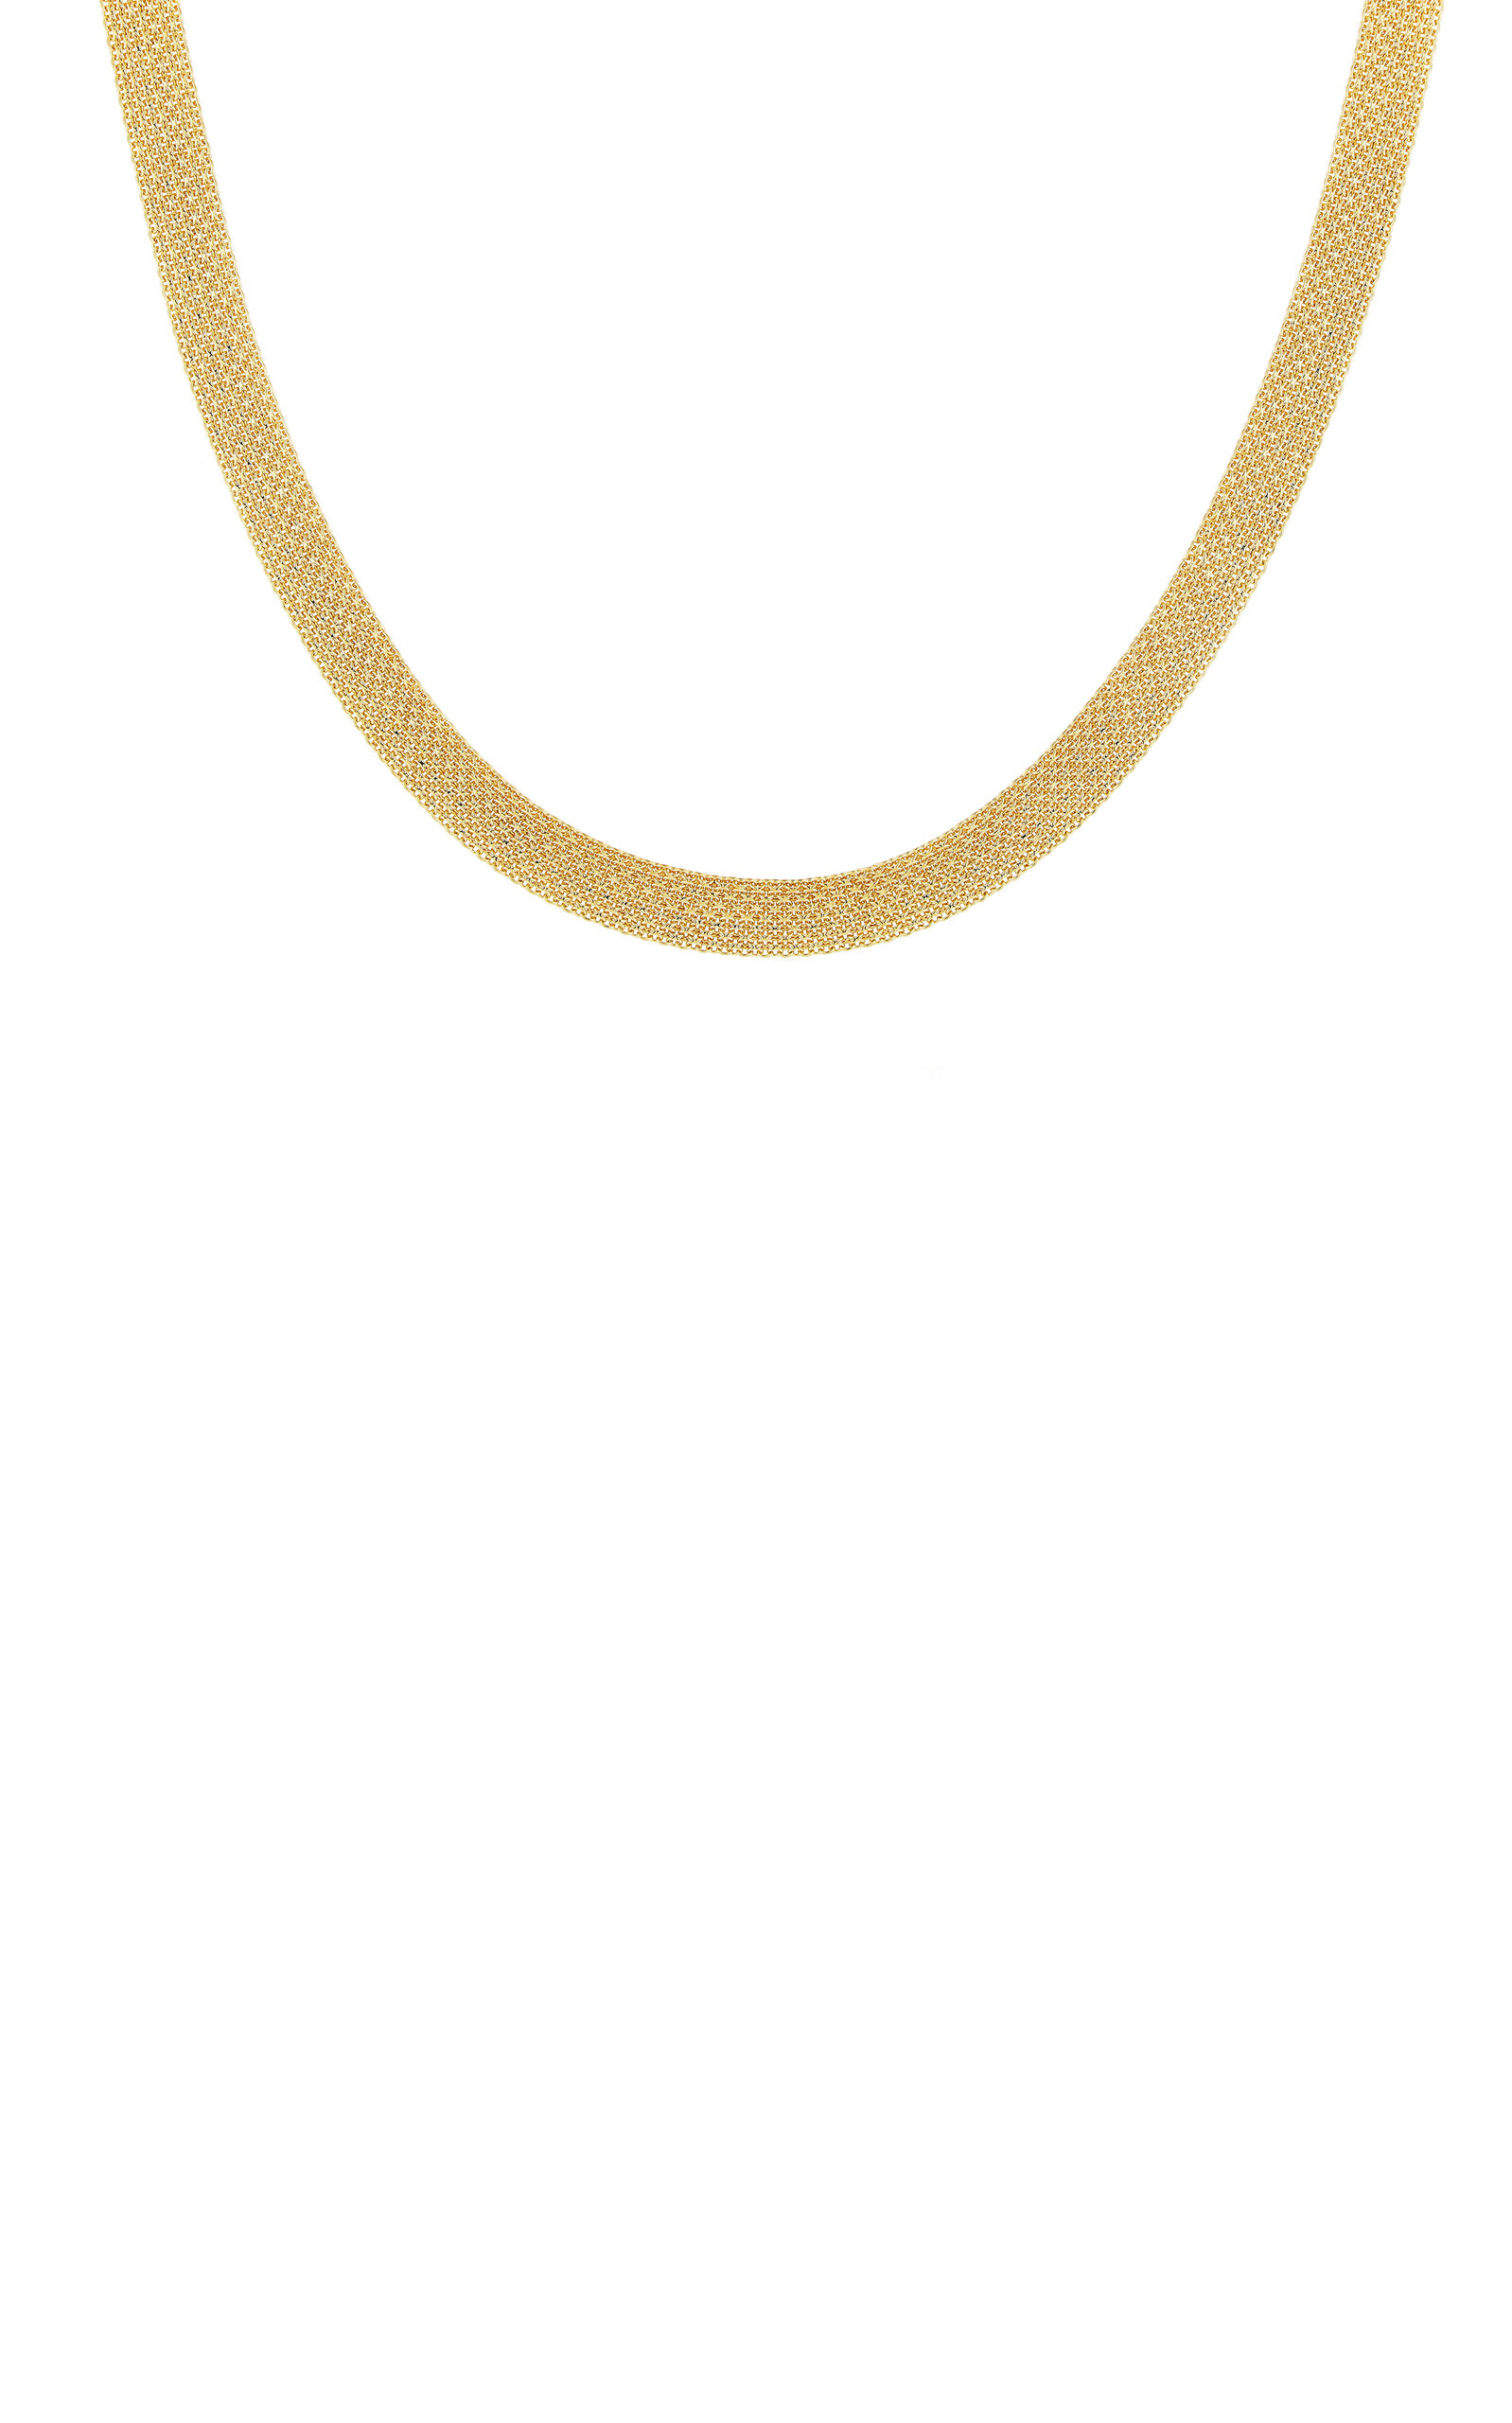 Ef Collection 14k Gold Necklace